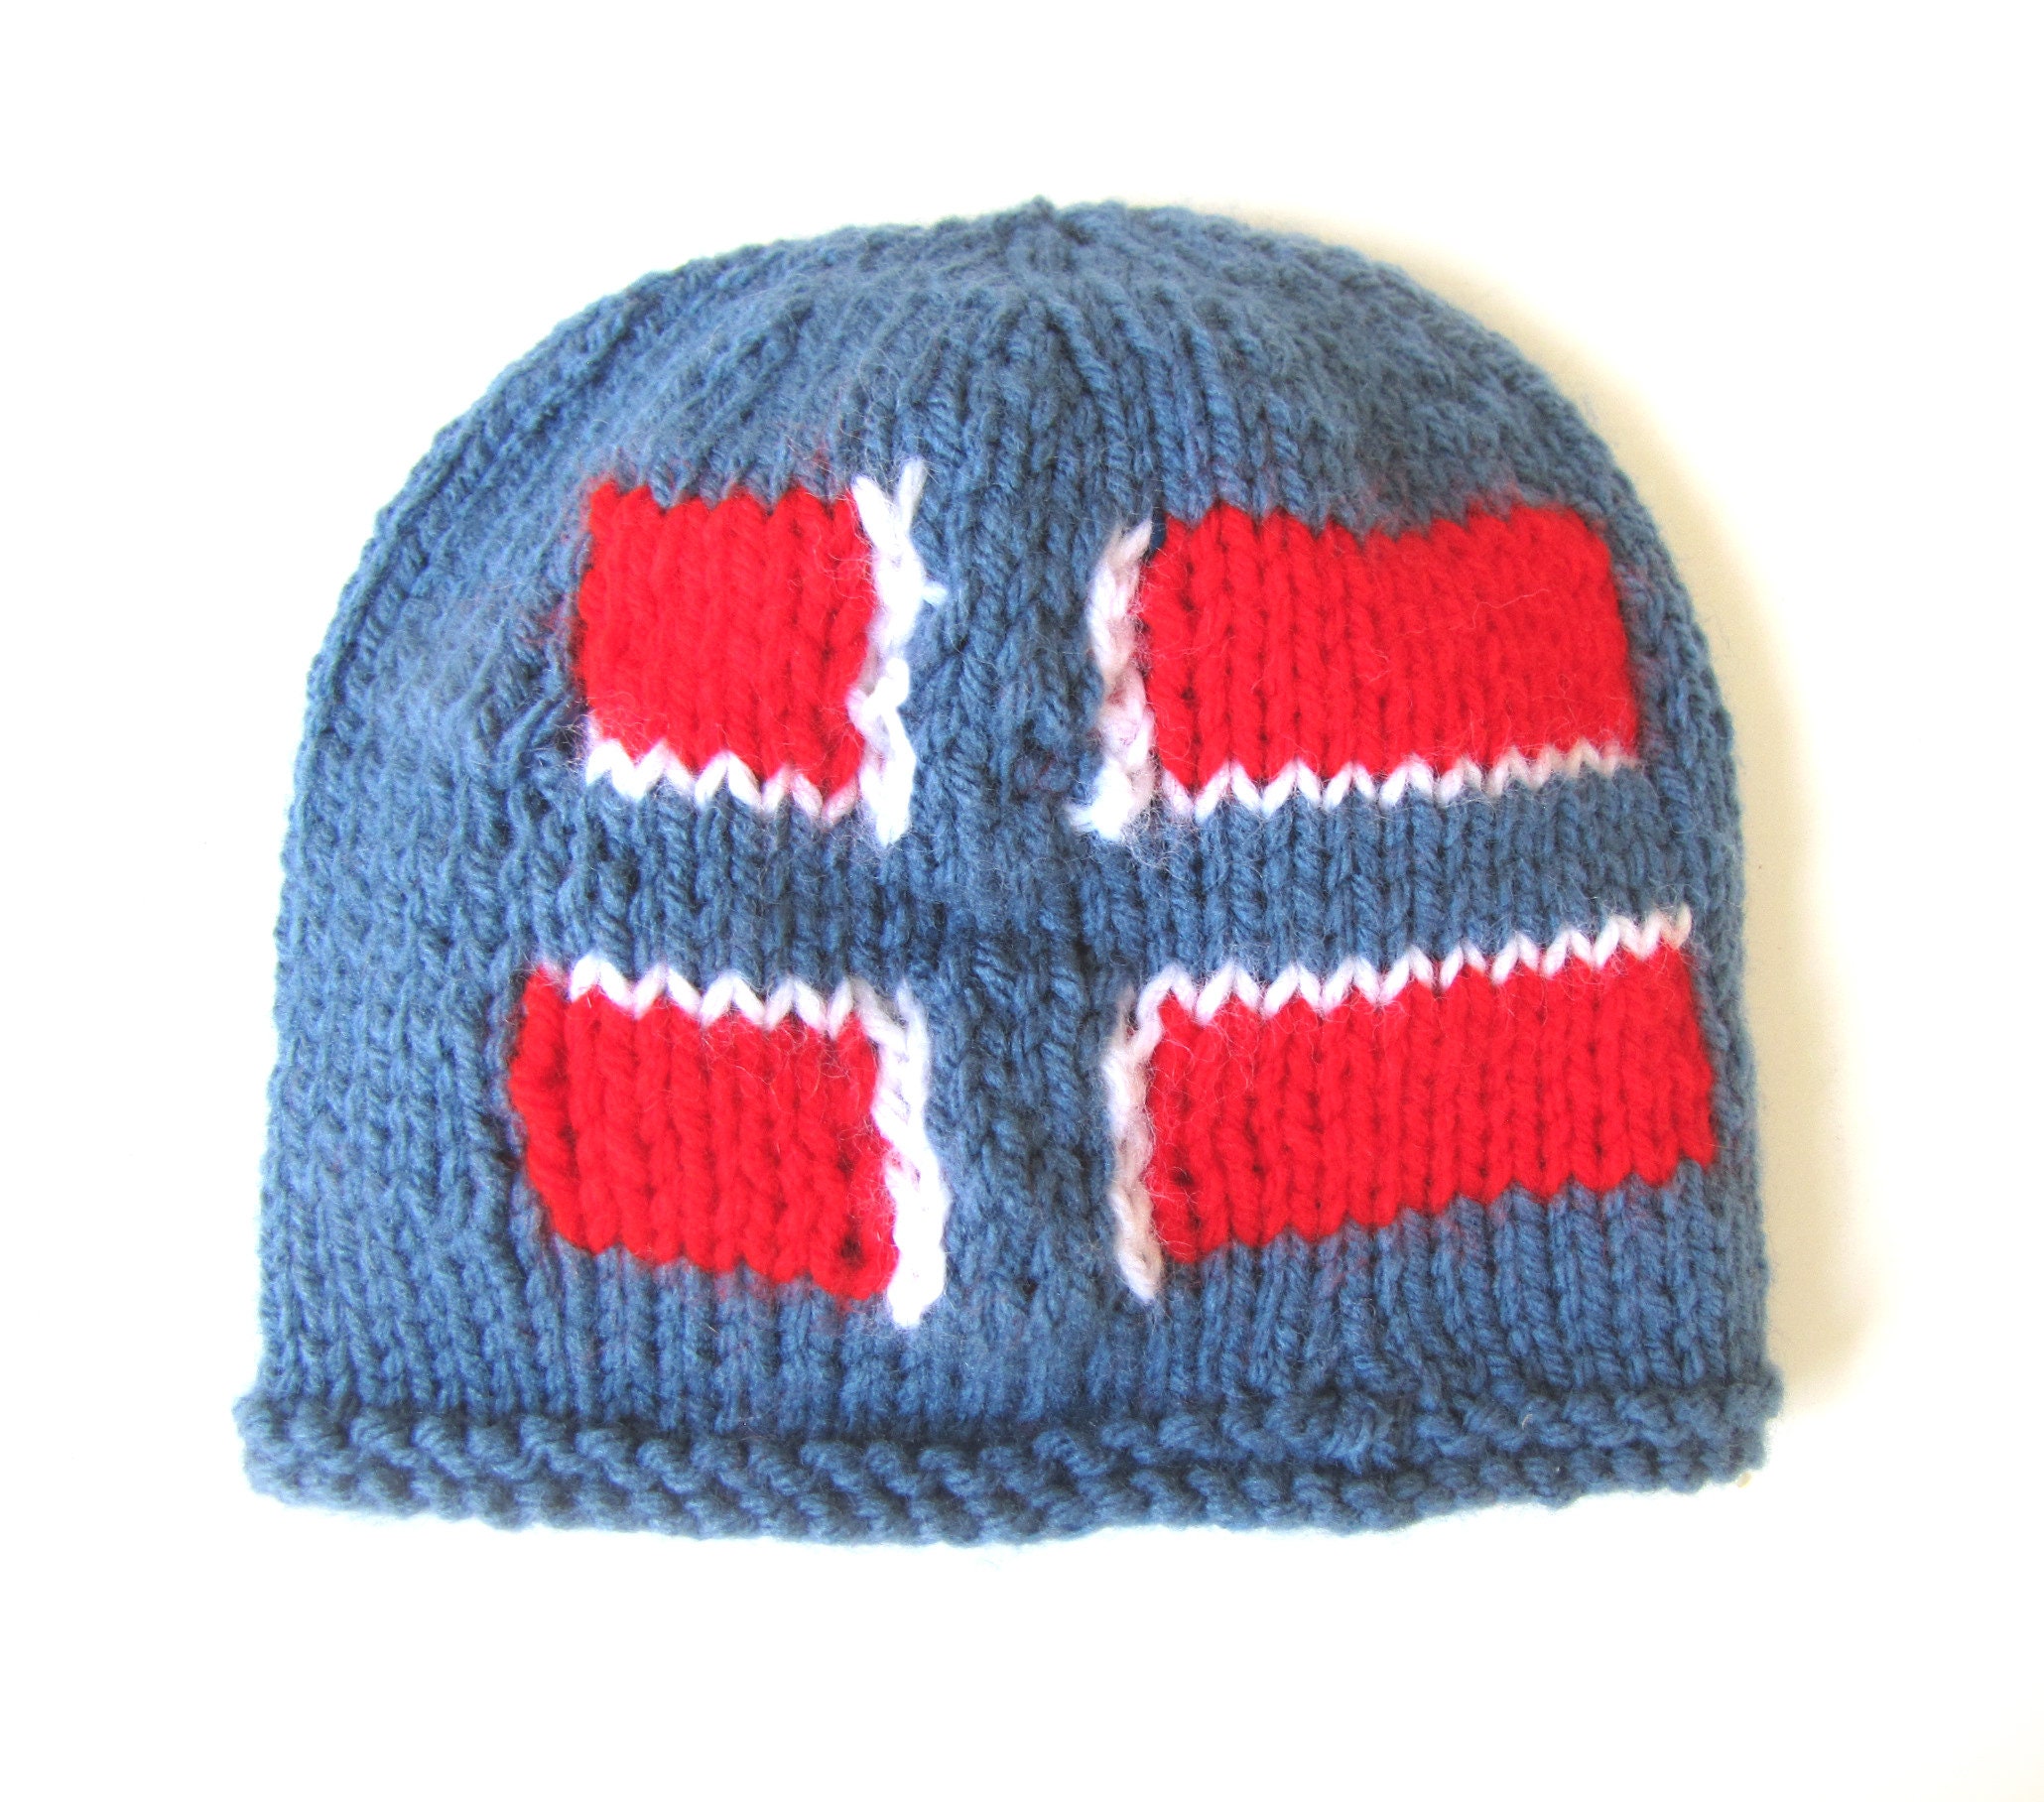 Gffdrings Norway Flag Thin Kids Knit Beanies Boys Girls Hats Hedging Caps 